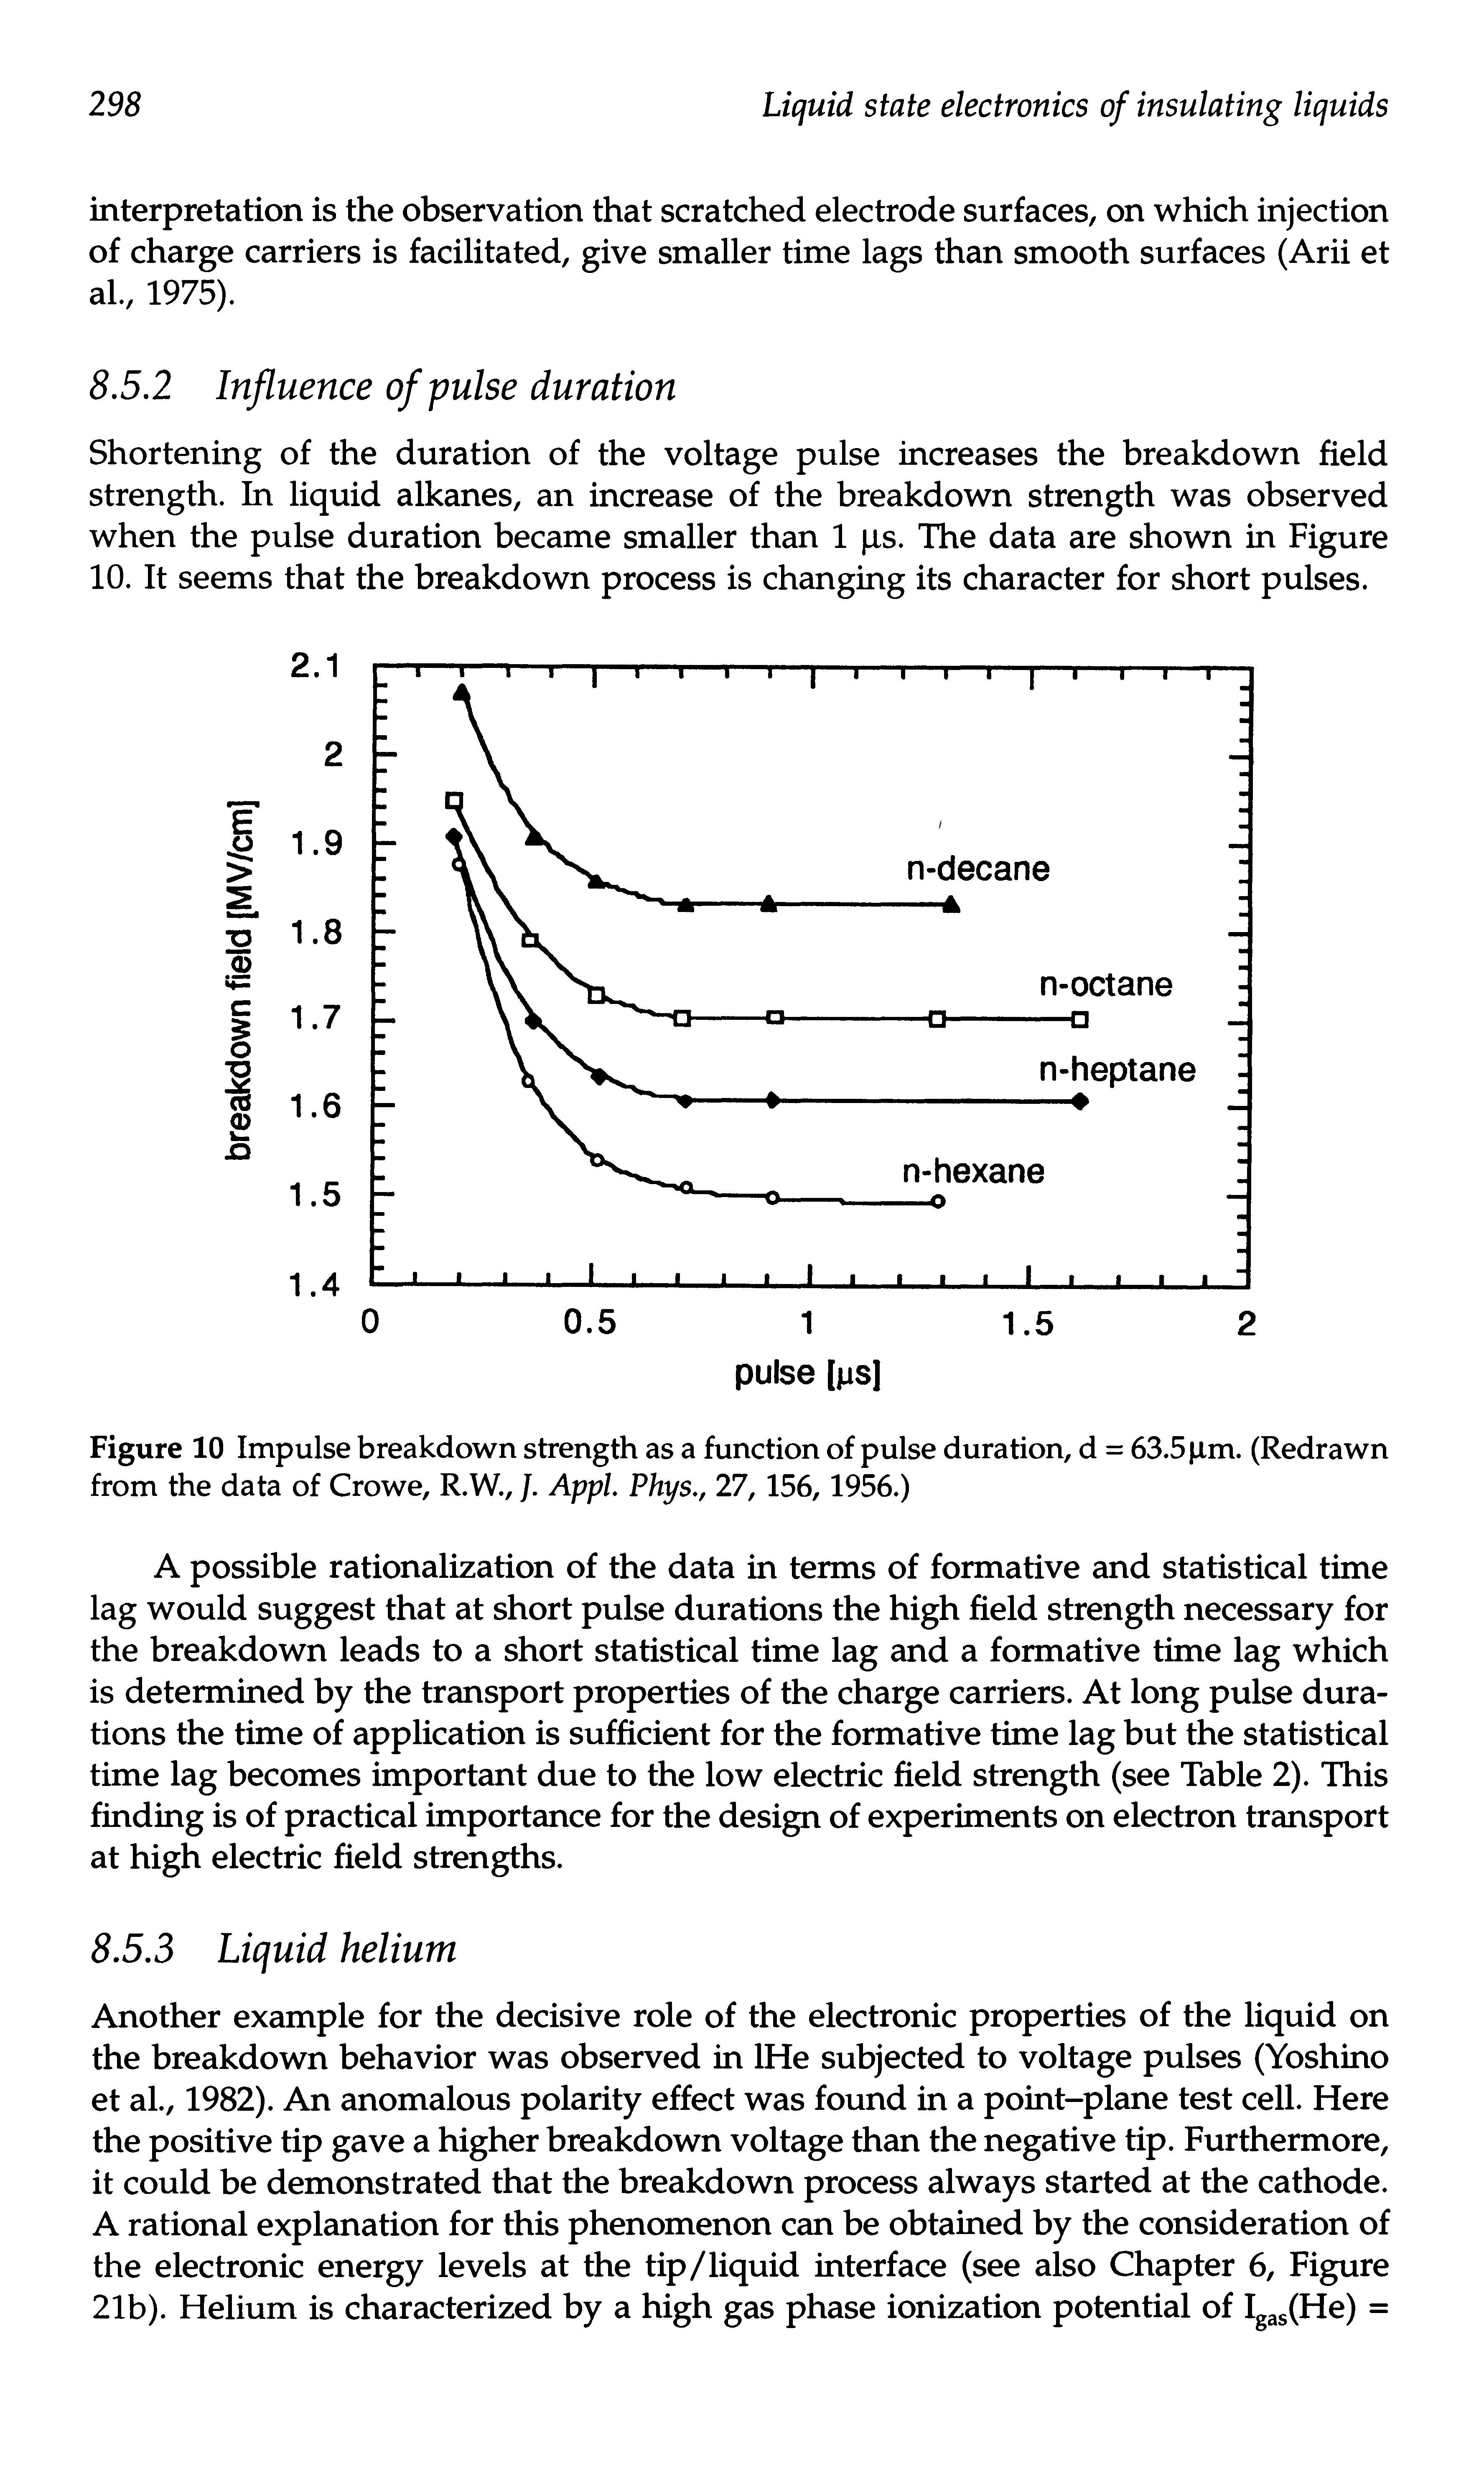 Figure 10 Impulse breakdown strength as a function of pulse duration, d = 63.5 im. (Redrawn from the data of Crowe, R.W., /. Appl. Phys., 17, 156, 1956.)...